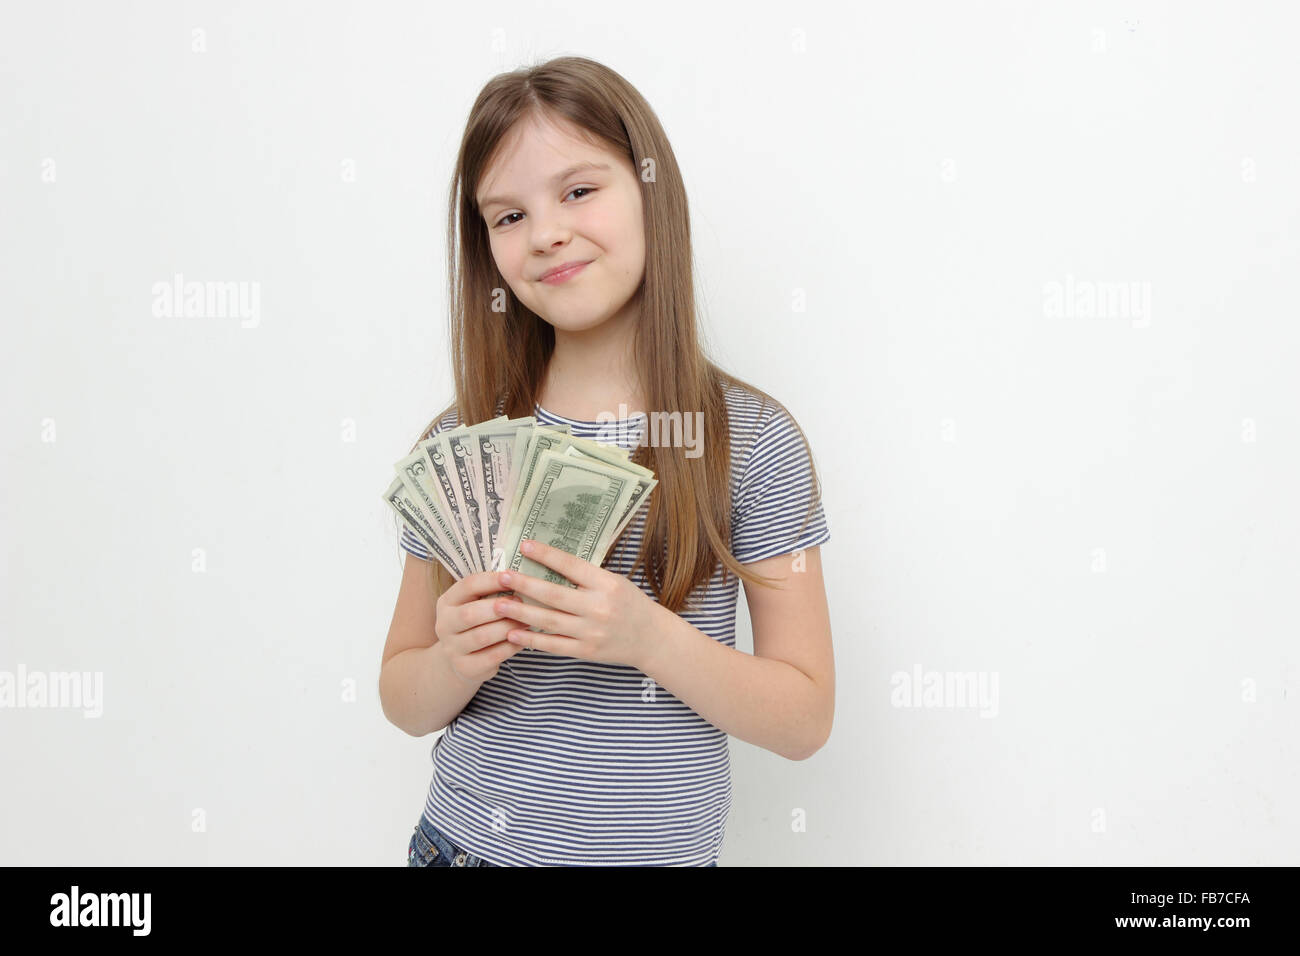 Teen For Cash Pictures 41